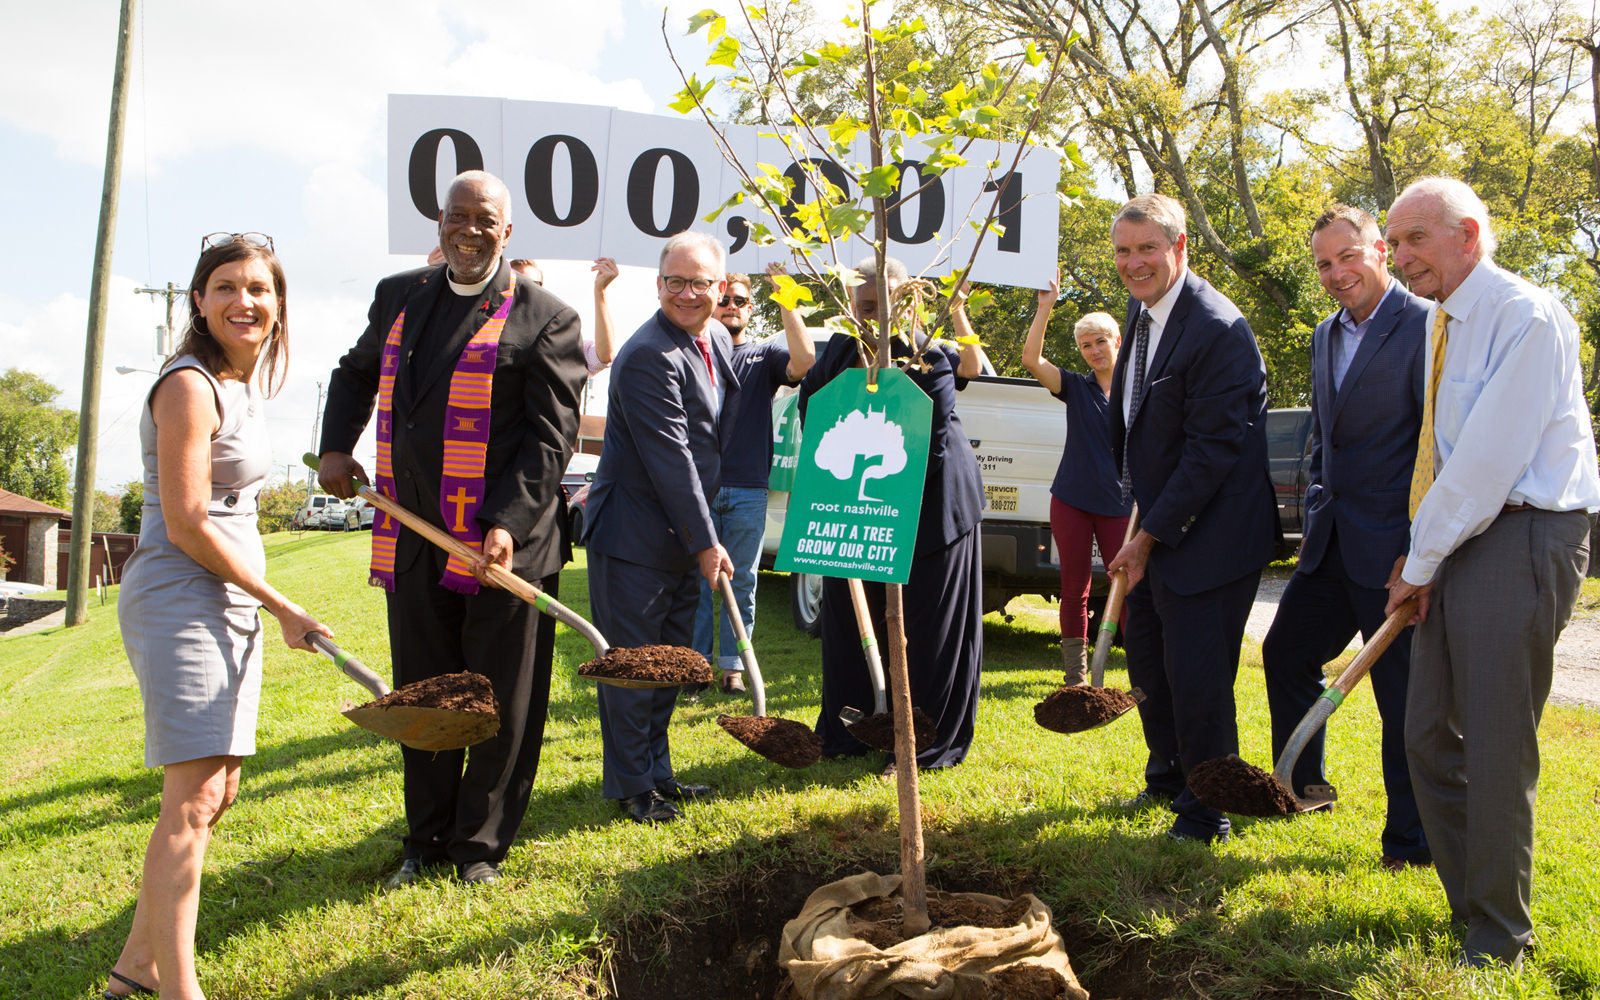 Mayor David Briley of Nashville, Tennessee, (third from left) joins other community leaders in planting the first tree to launch Root Nashville.